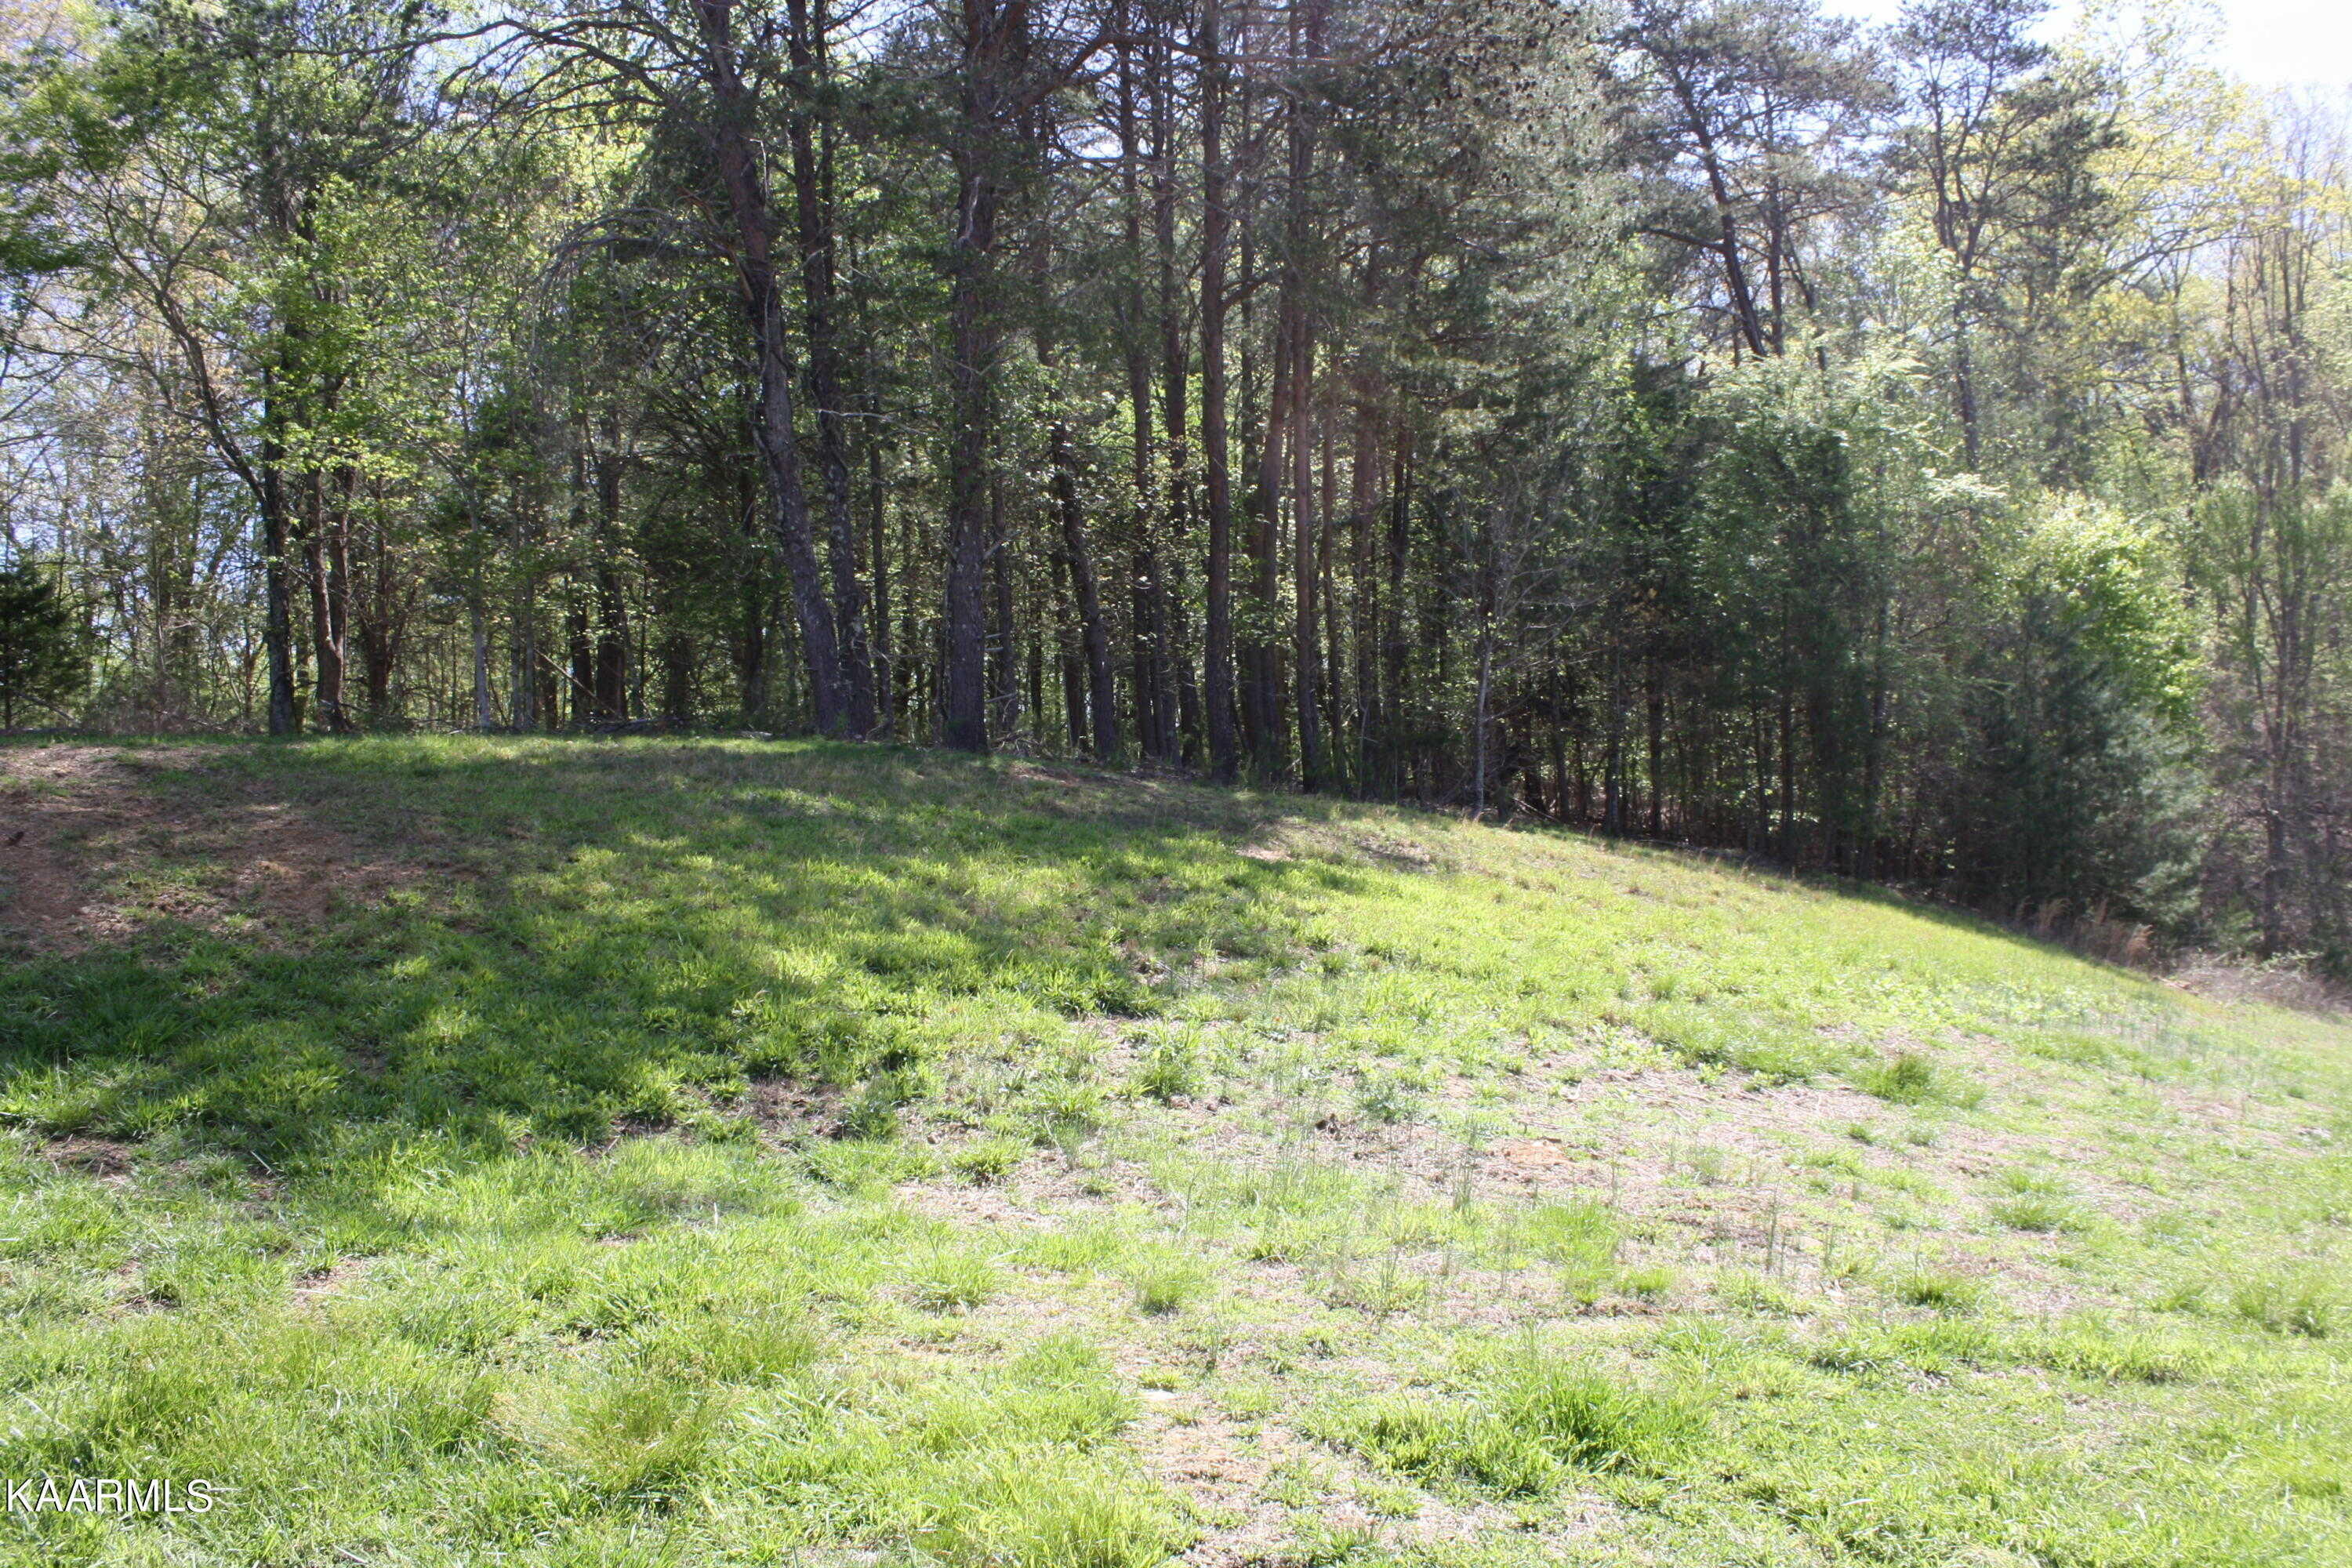 Photo 1 of 26 of Cove Springs Drive Drive land